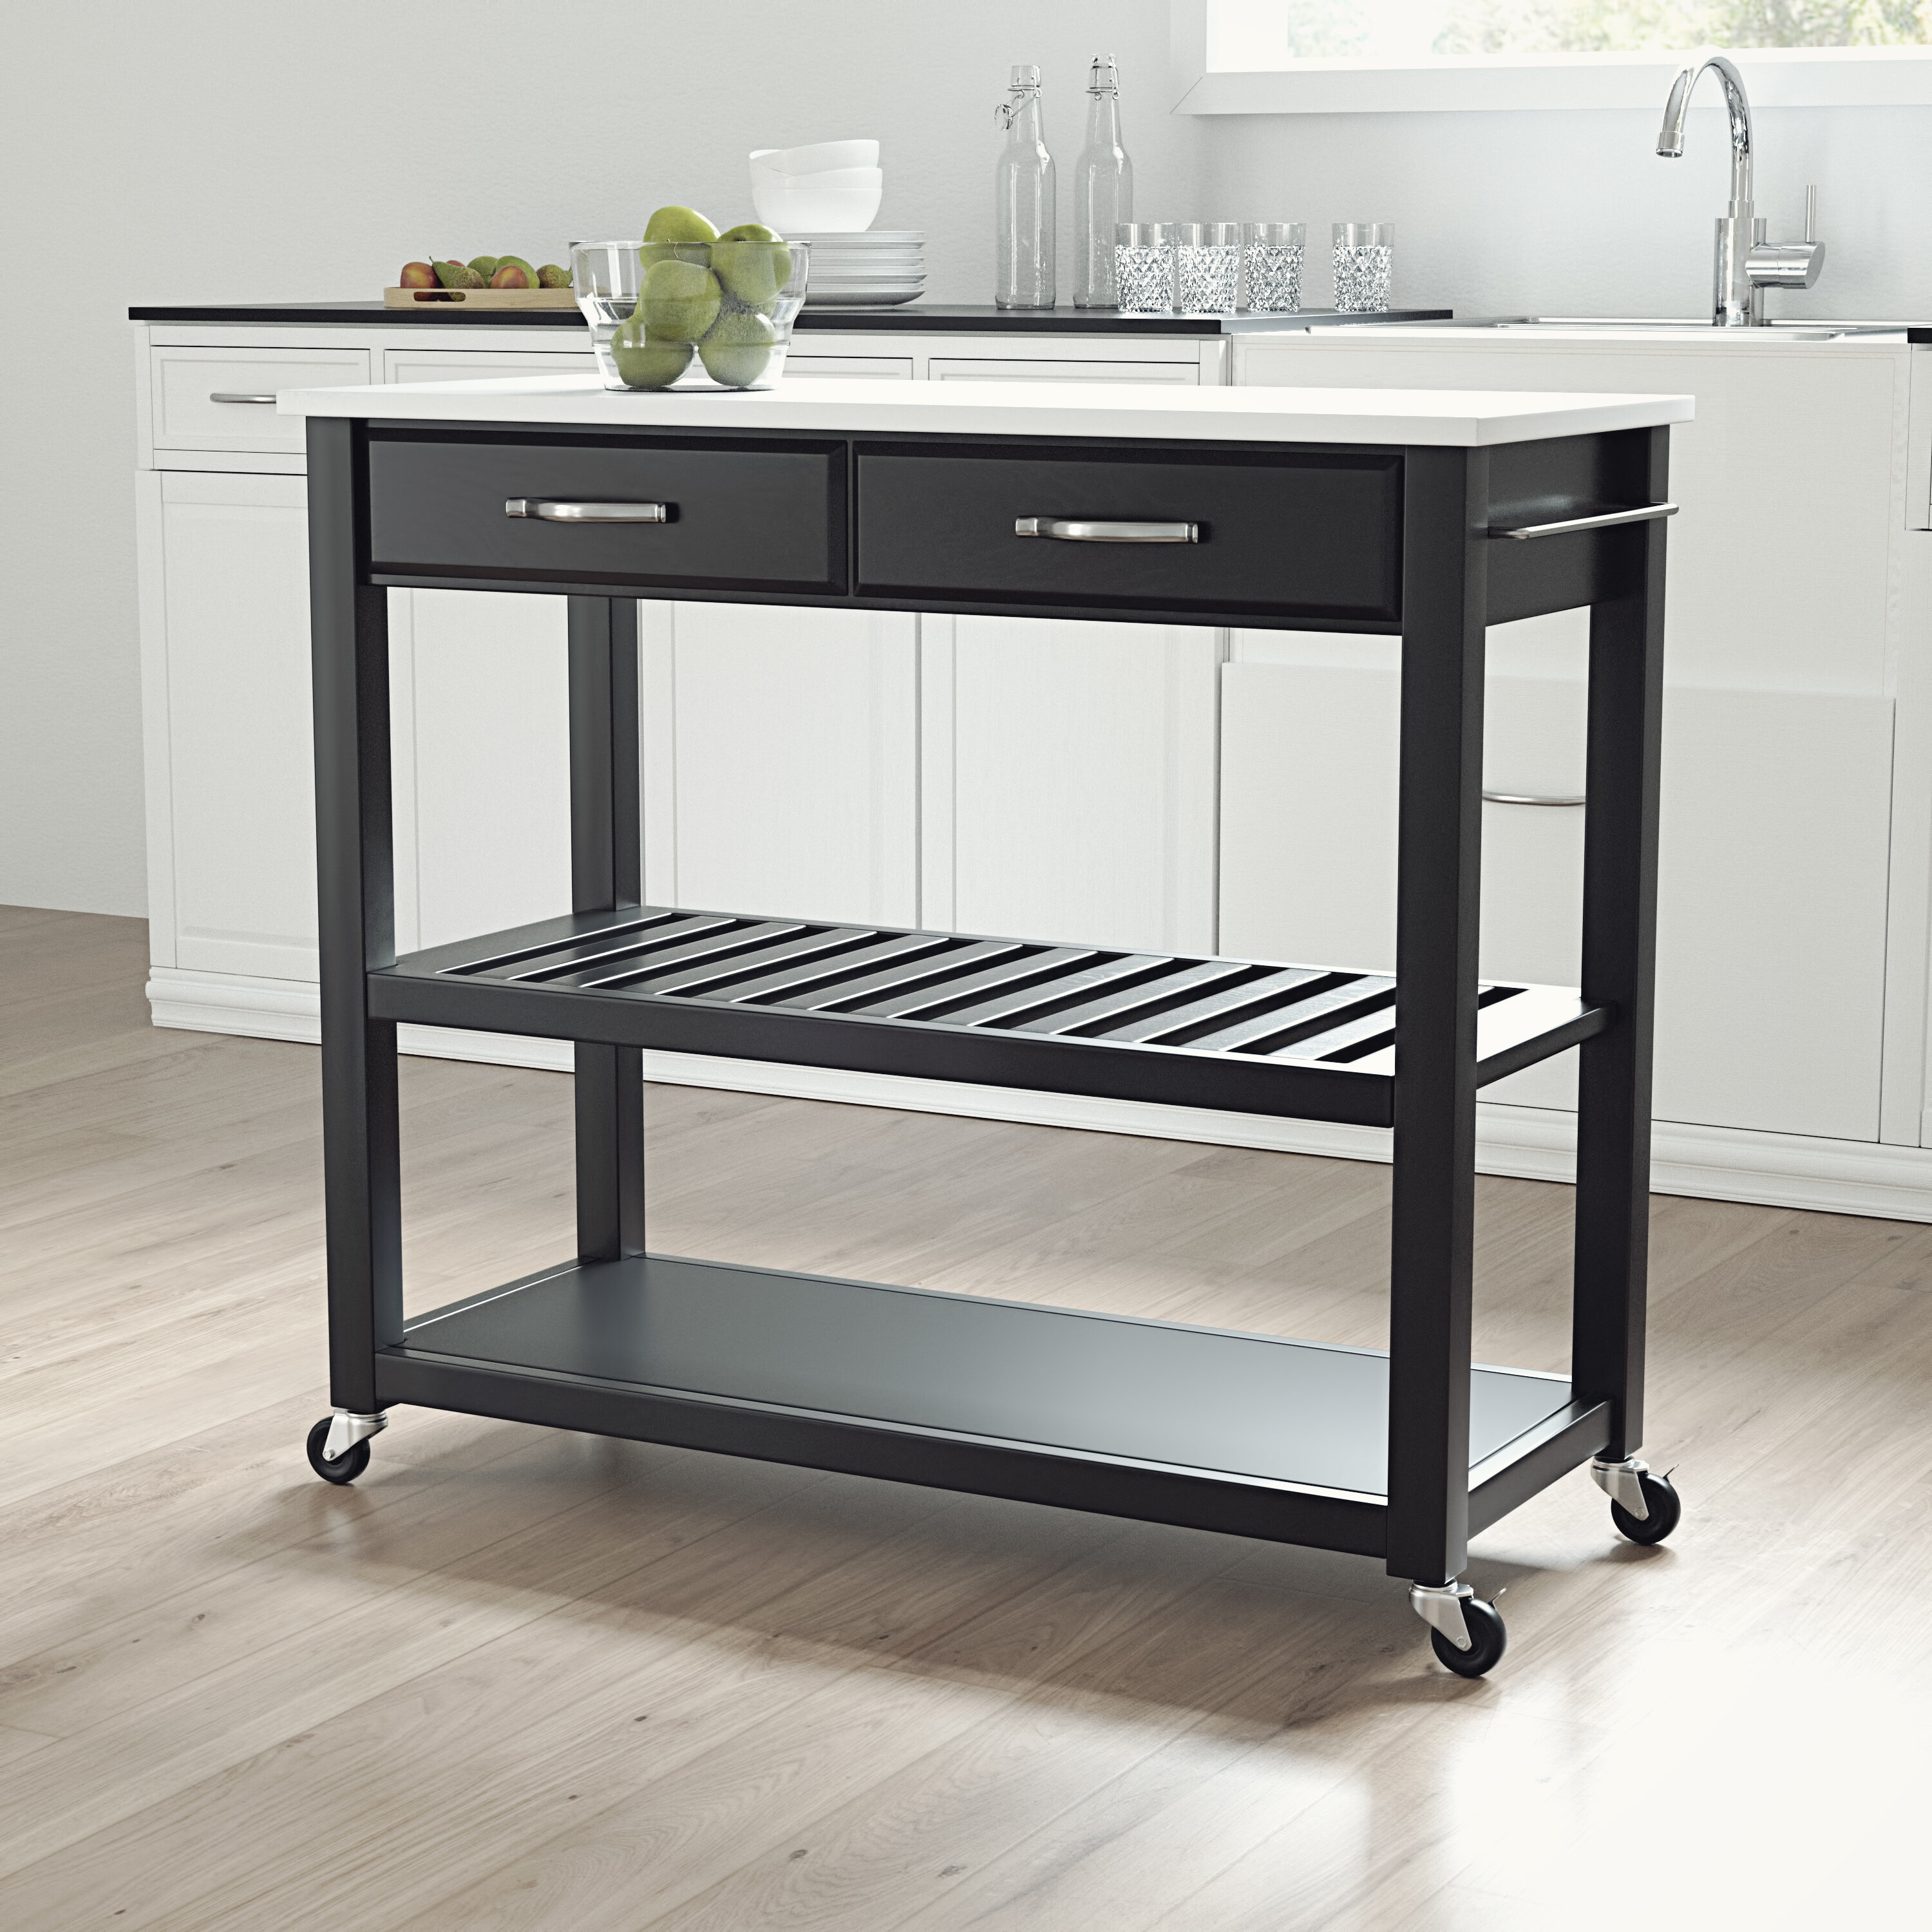 Winston Porter Lagarde Kitchen Cart With Granite Top Reviews